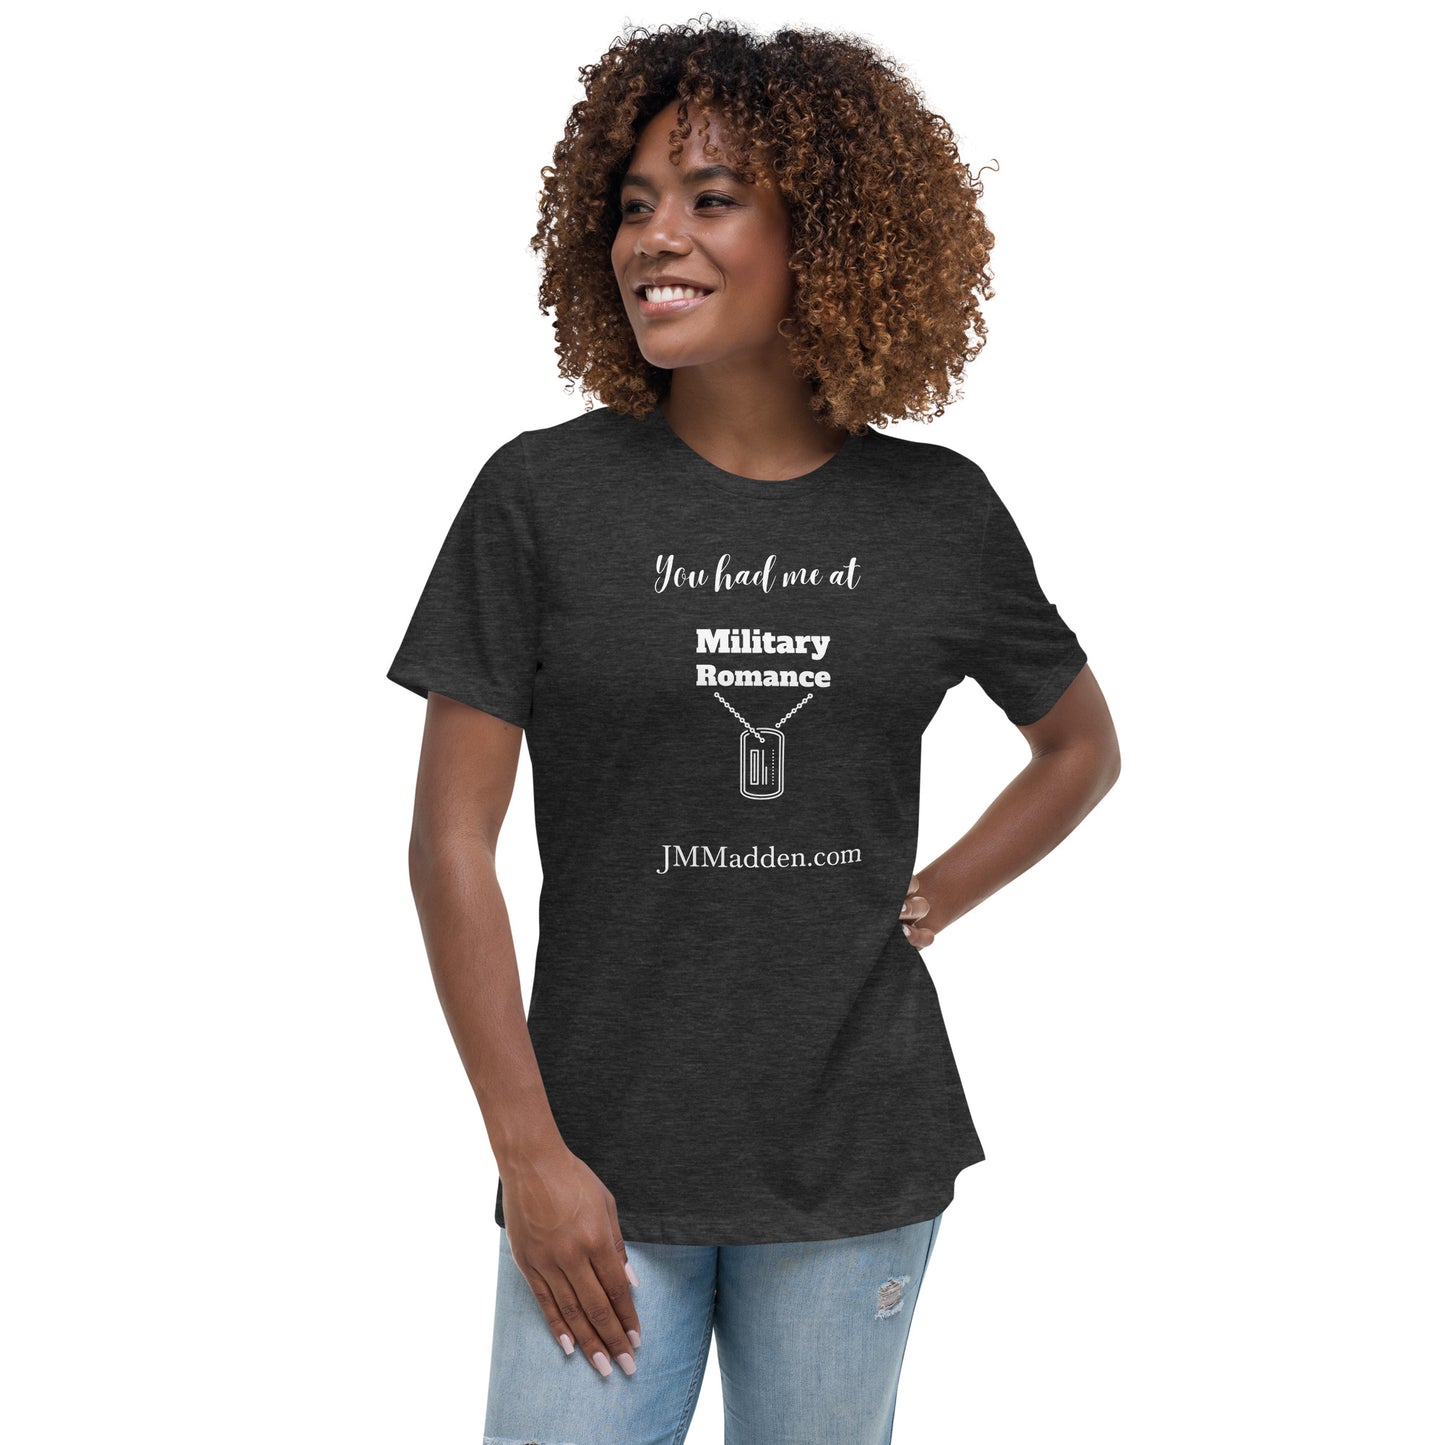 Women's Relaxed T-Shirt You had me at military romance, white lettering, author logo